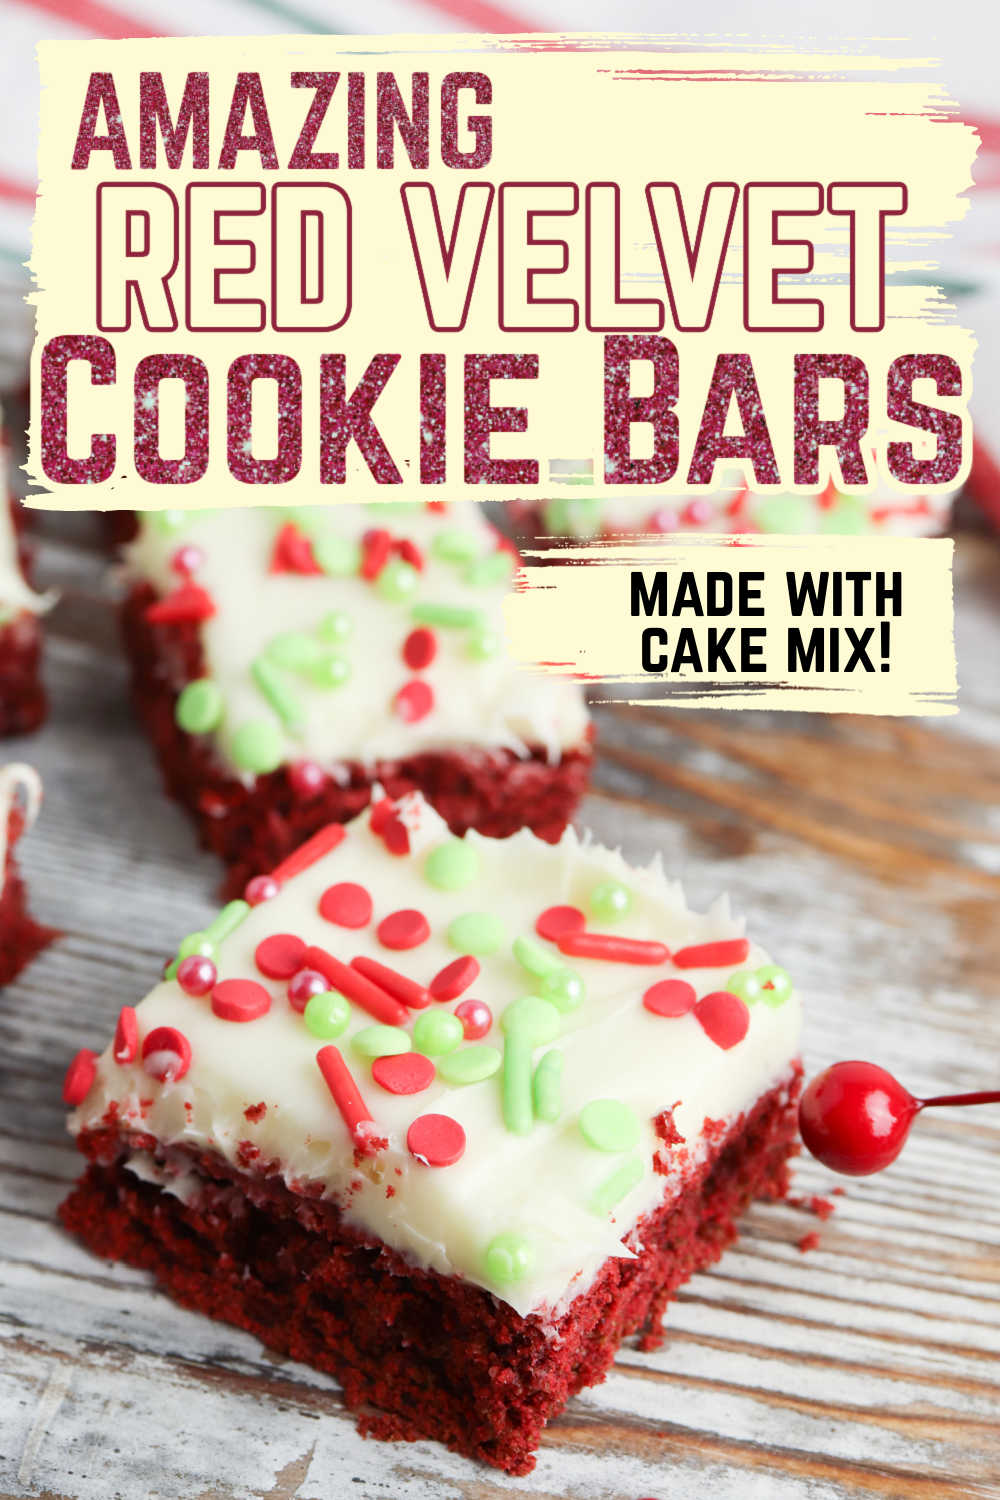 Pin image: top says "Amazing red velvet cookie bars: made from cake mix" bottom has a slice of red velvet cookie bar.